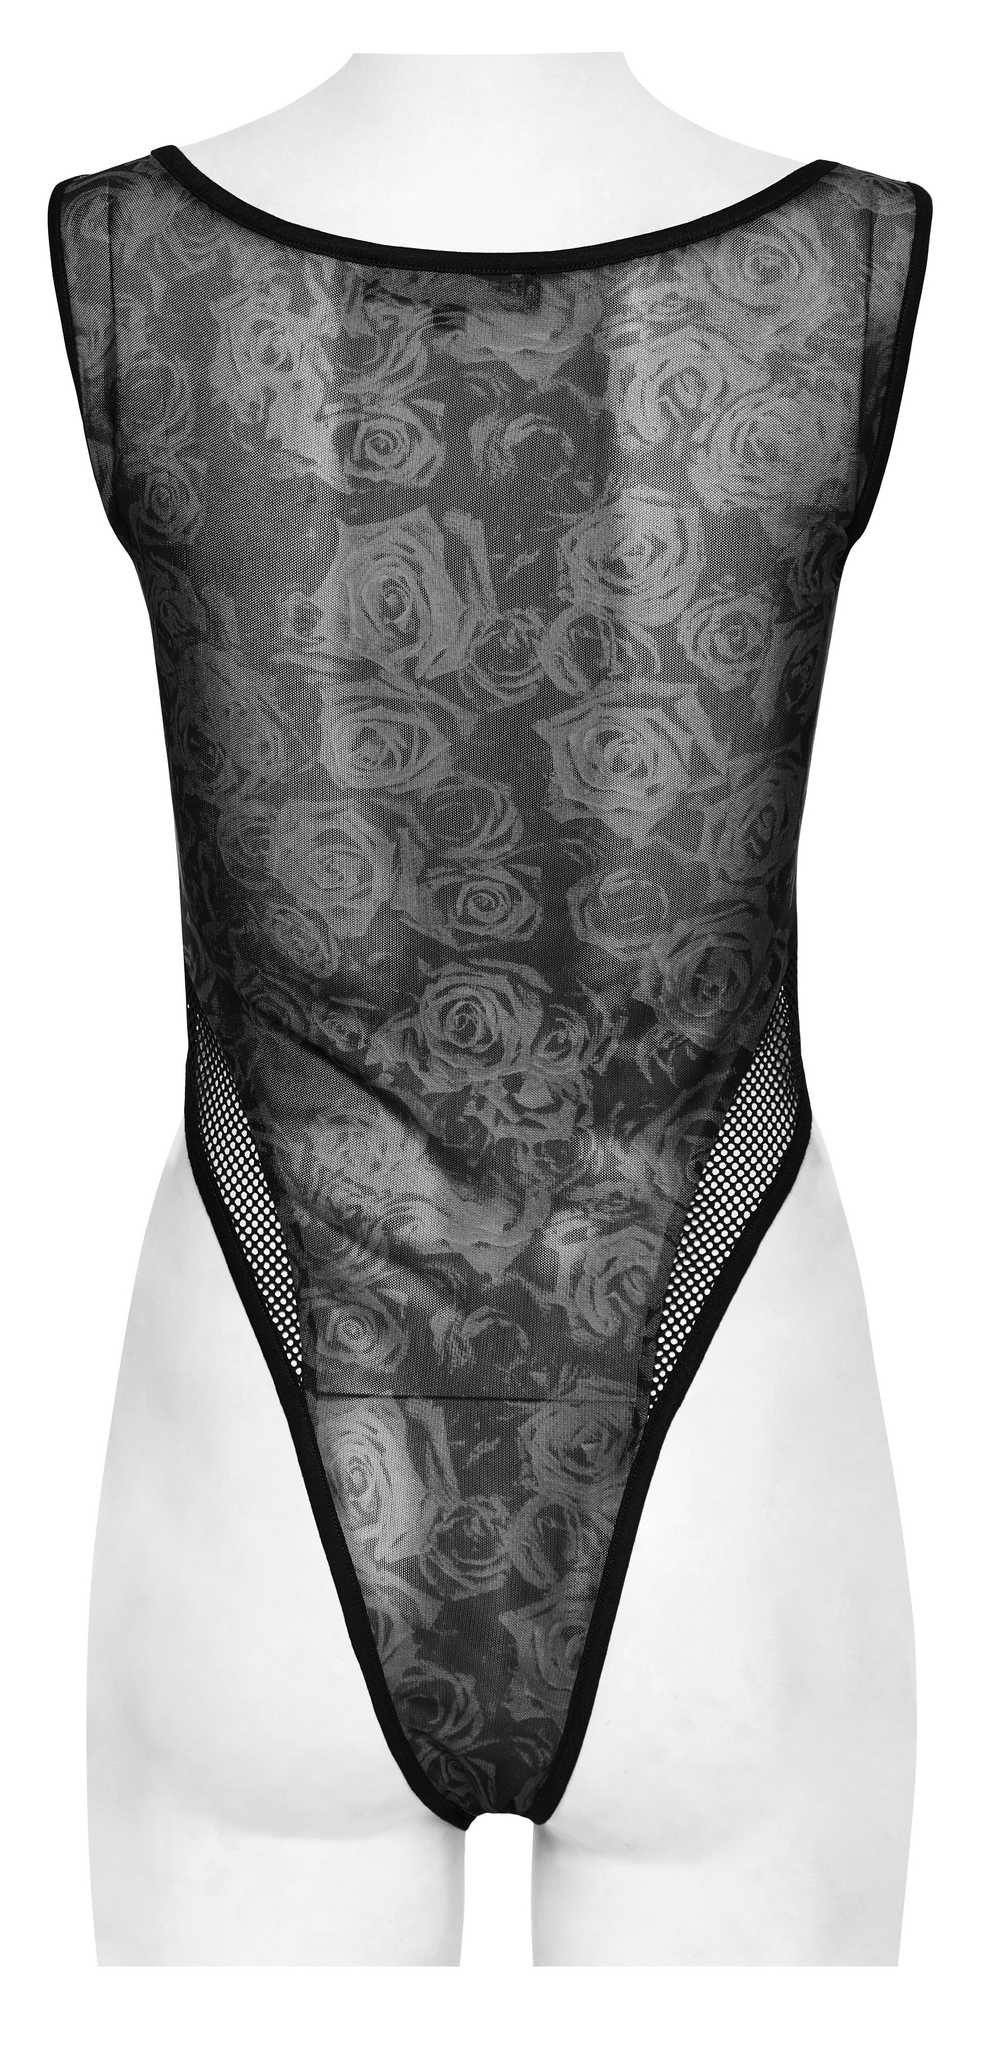 Edgy Women's Black Floral Bodysuit with Mesh Accents